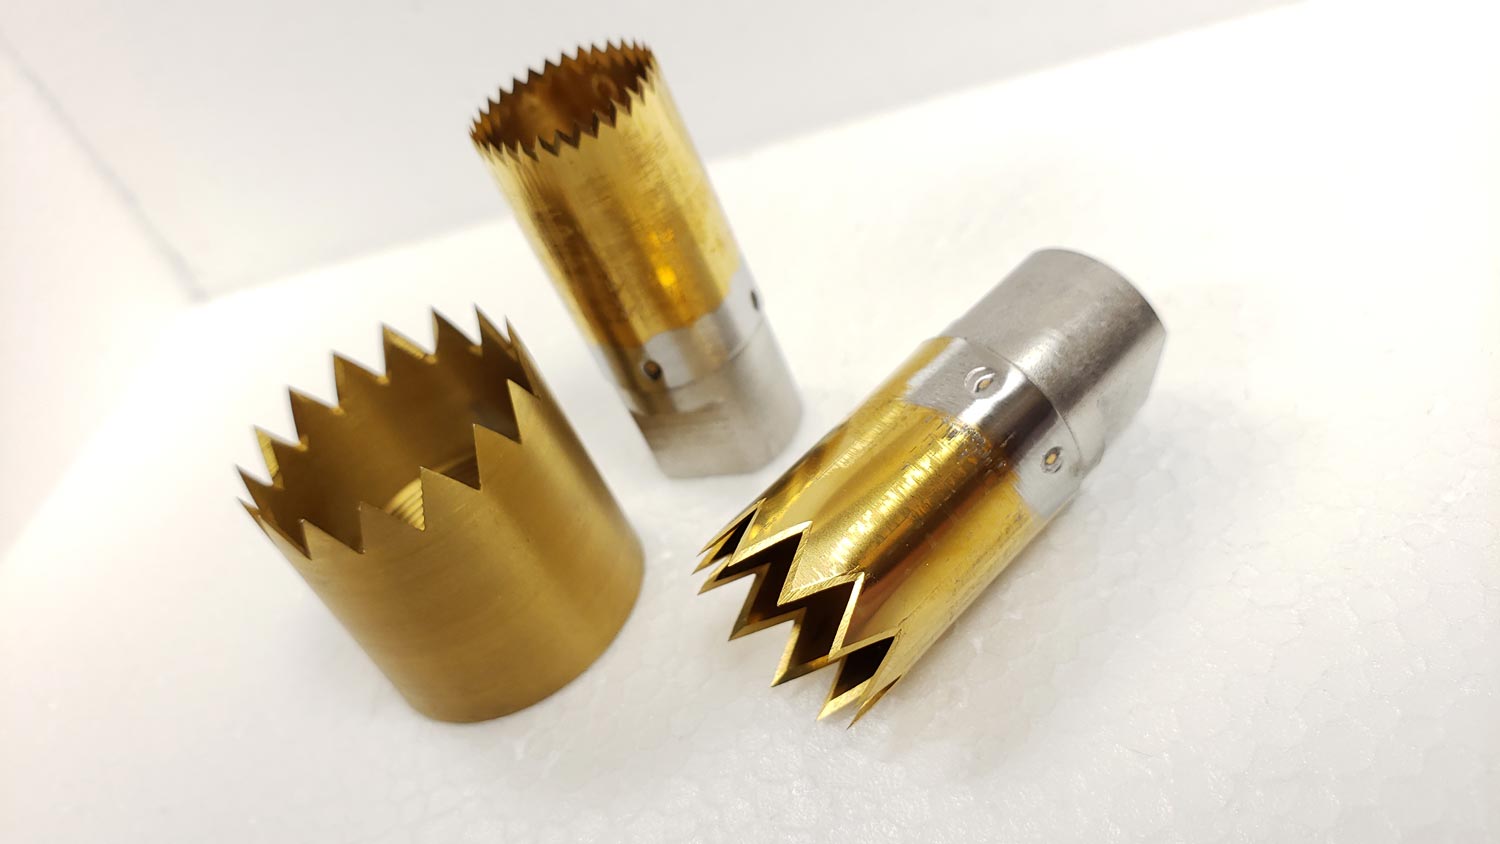 toothed vs. die cut punches offer different cutting solutions for packaging pouch manufacturers